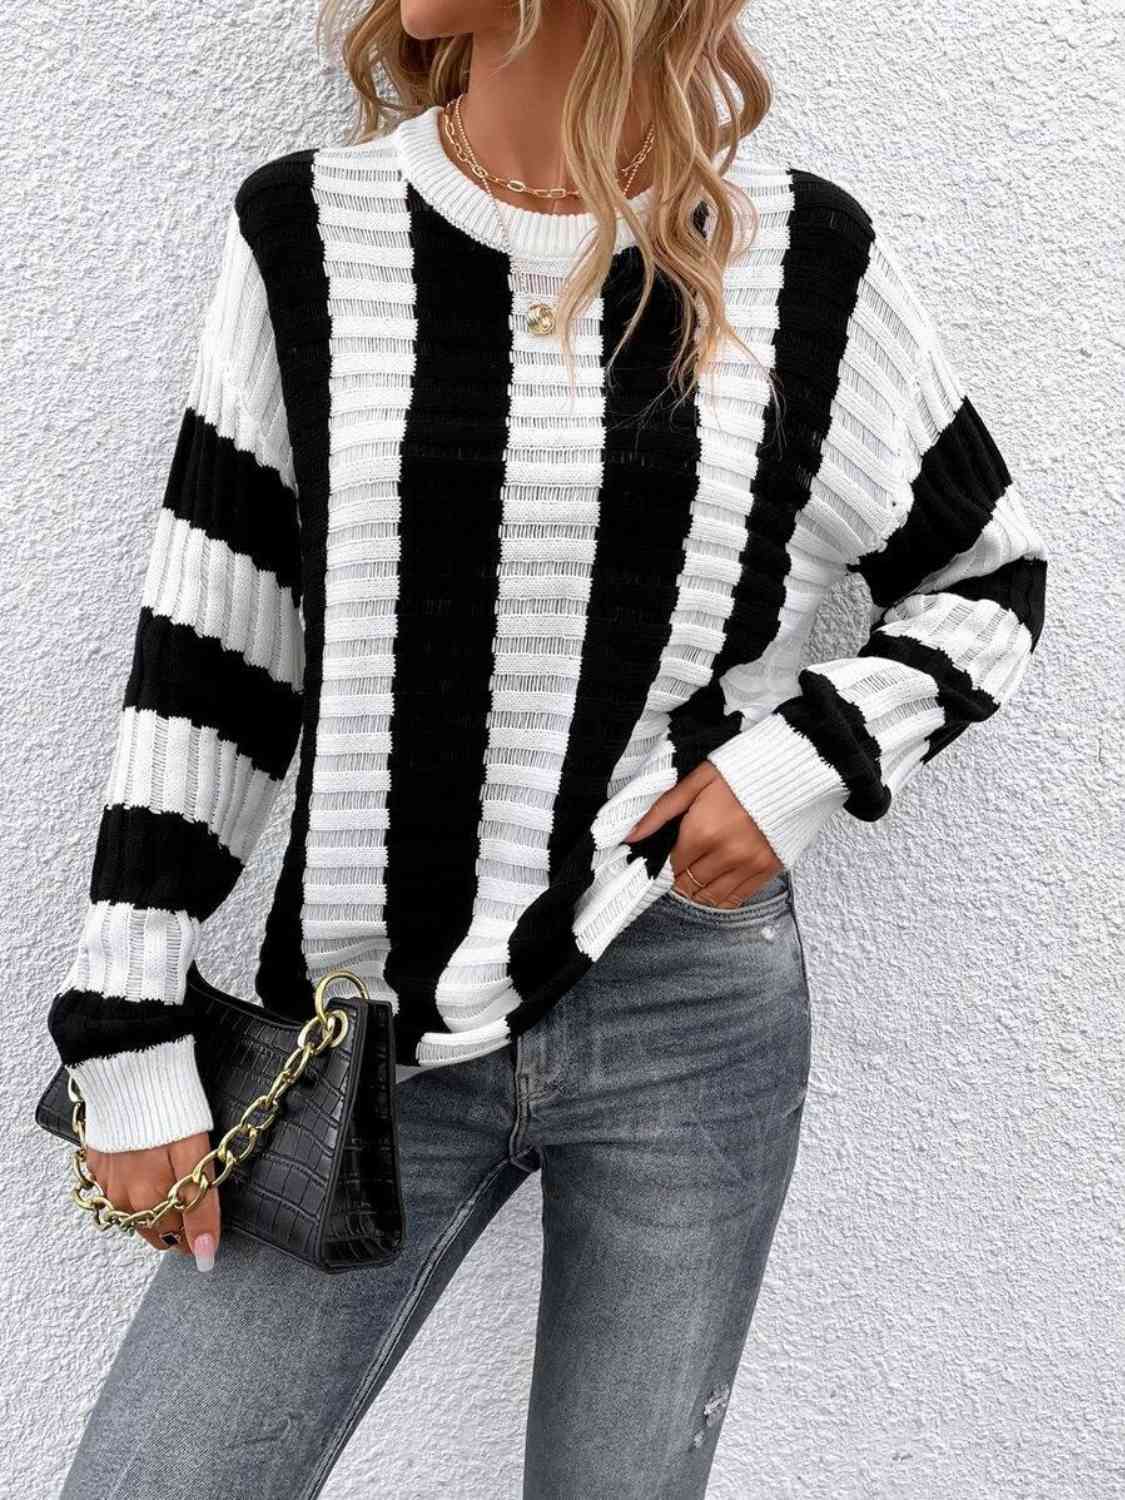 Striped Round Neck Long Sleeve Knit Top